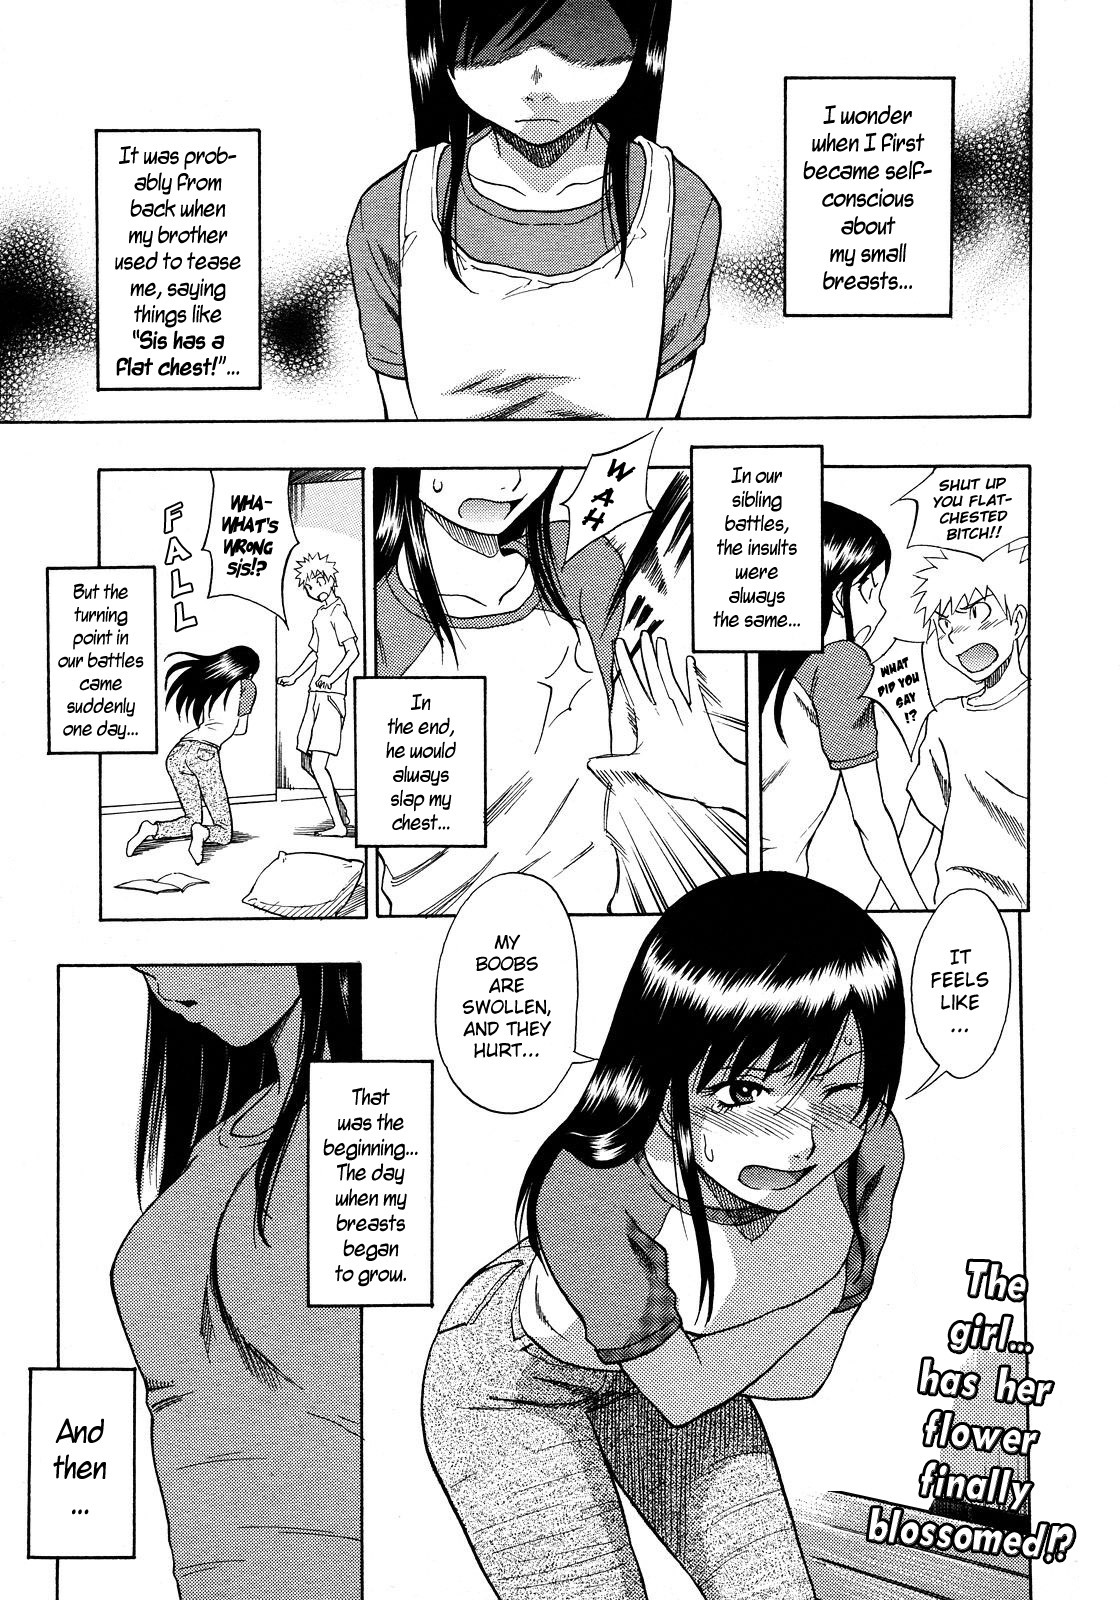 echi-hentai:   Tiny Boobs Giant Tits History This pearl is one of my favorit storys